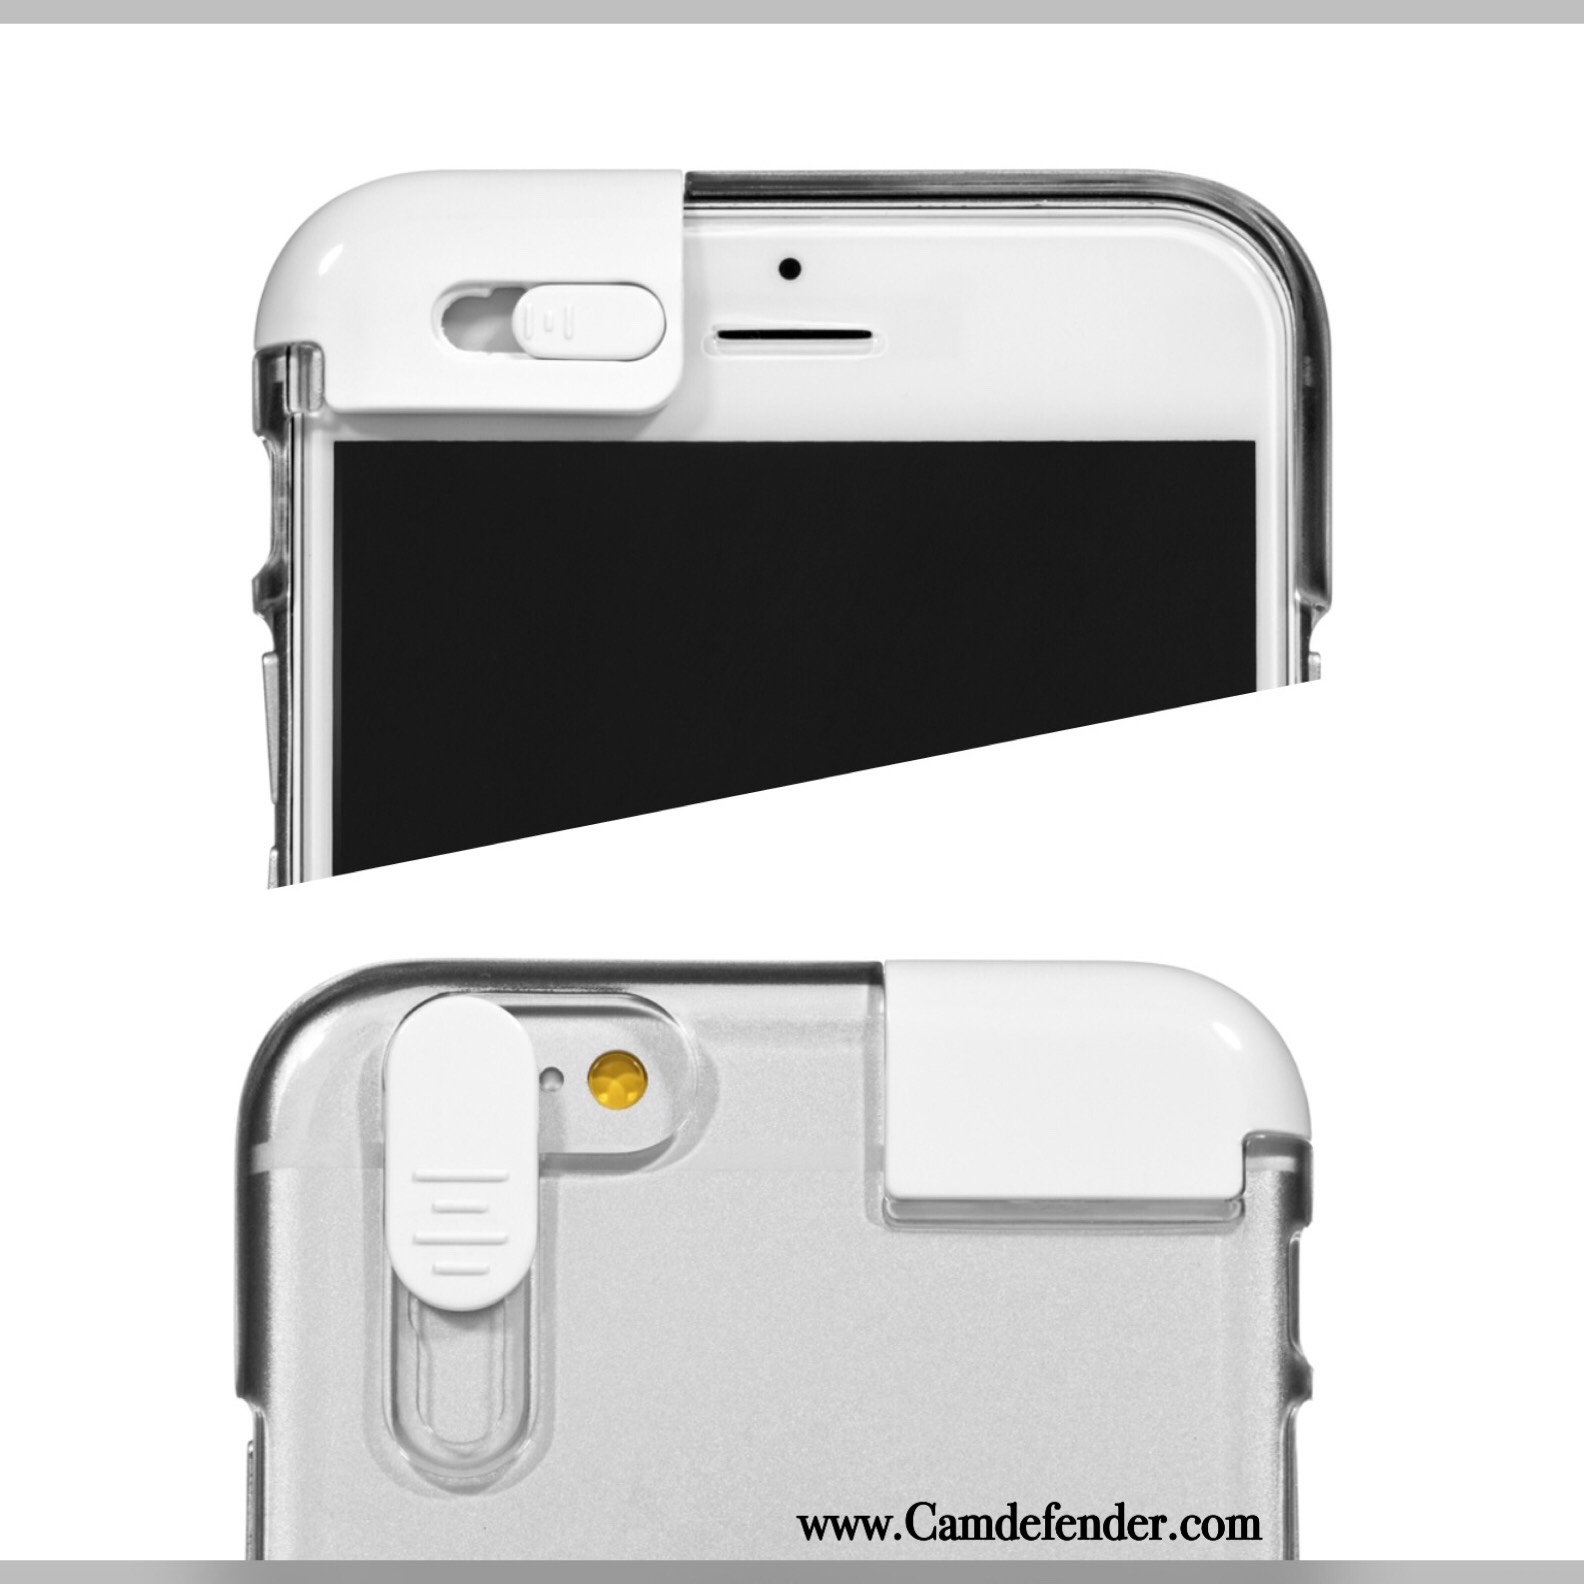 The sleek, minimal design of the cell phone case offers protection against hackers as well as unfortunate drops.